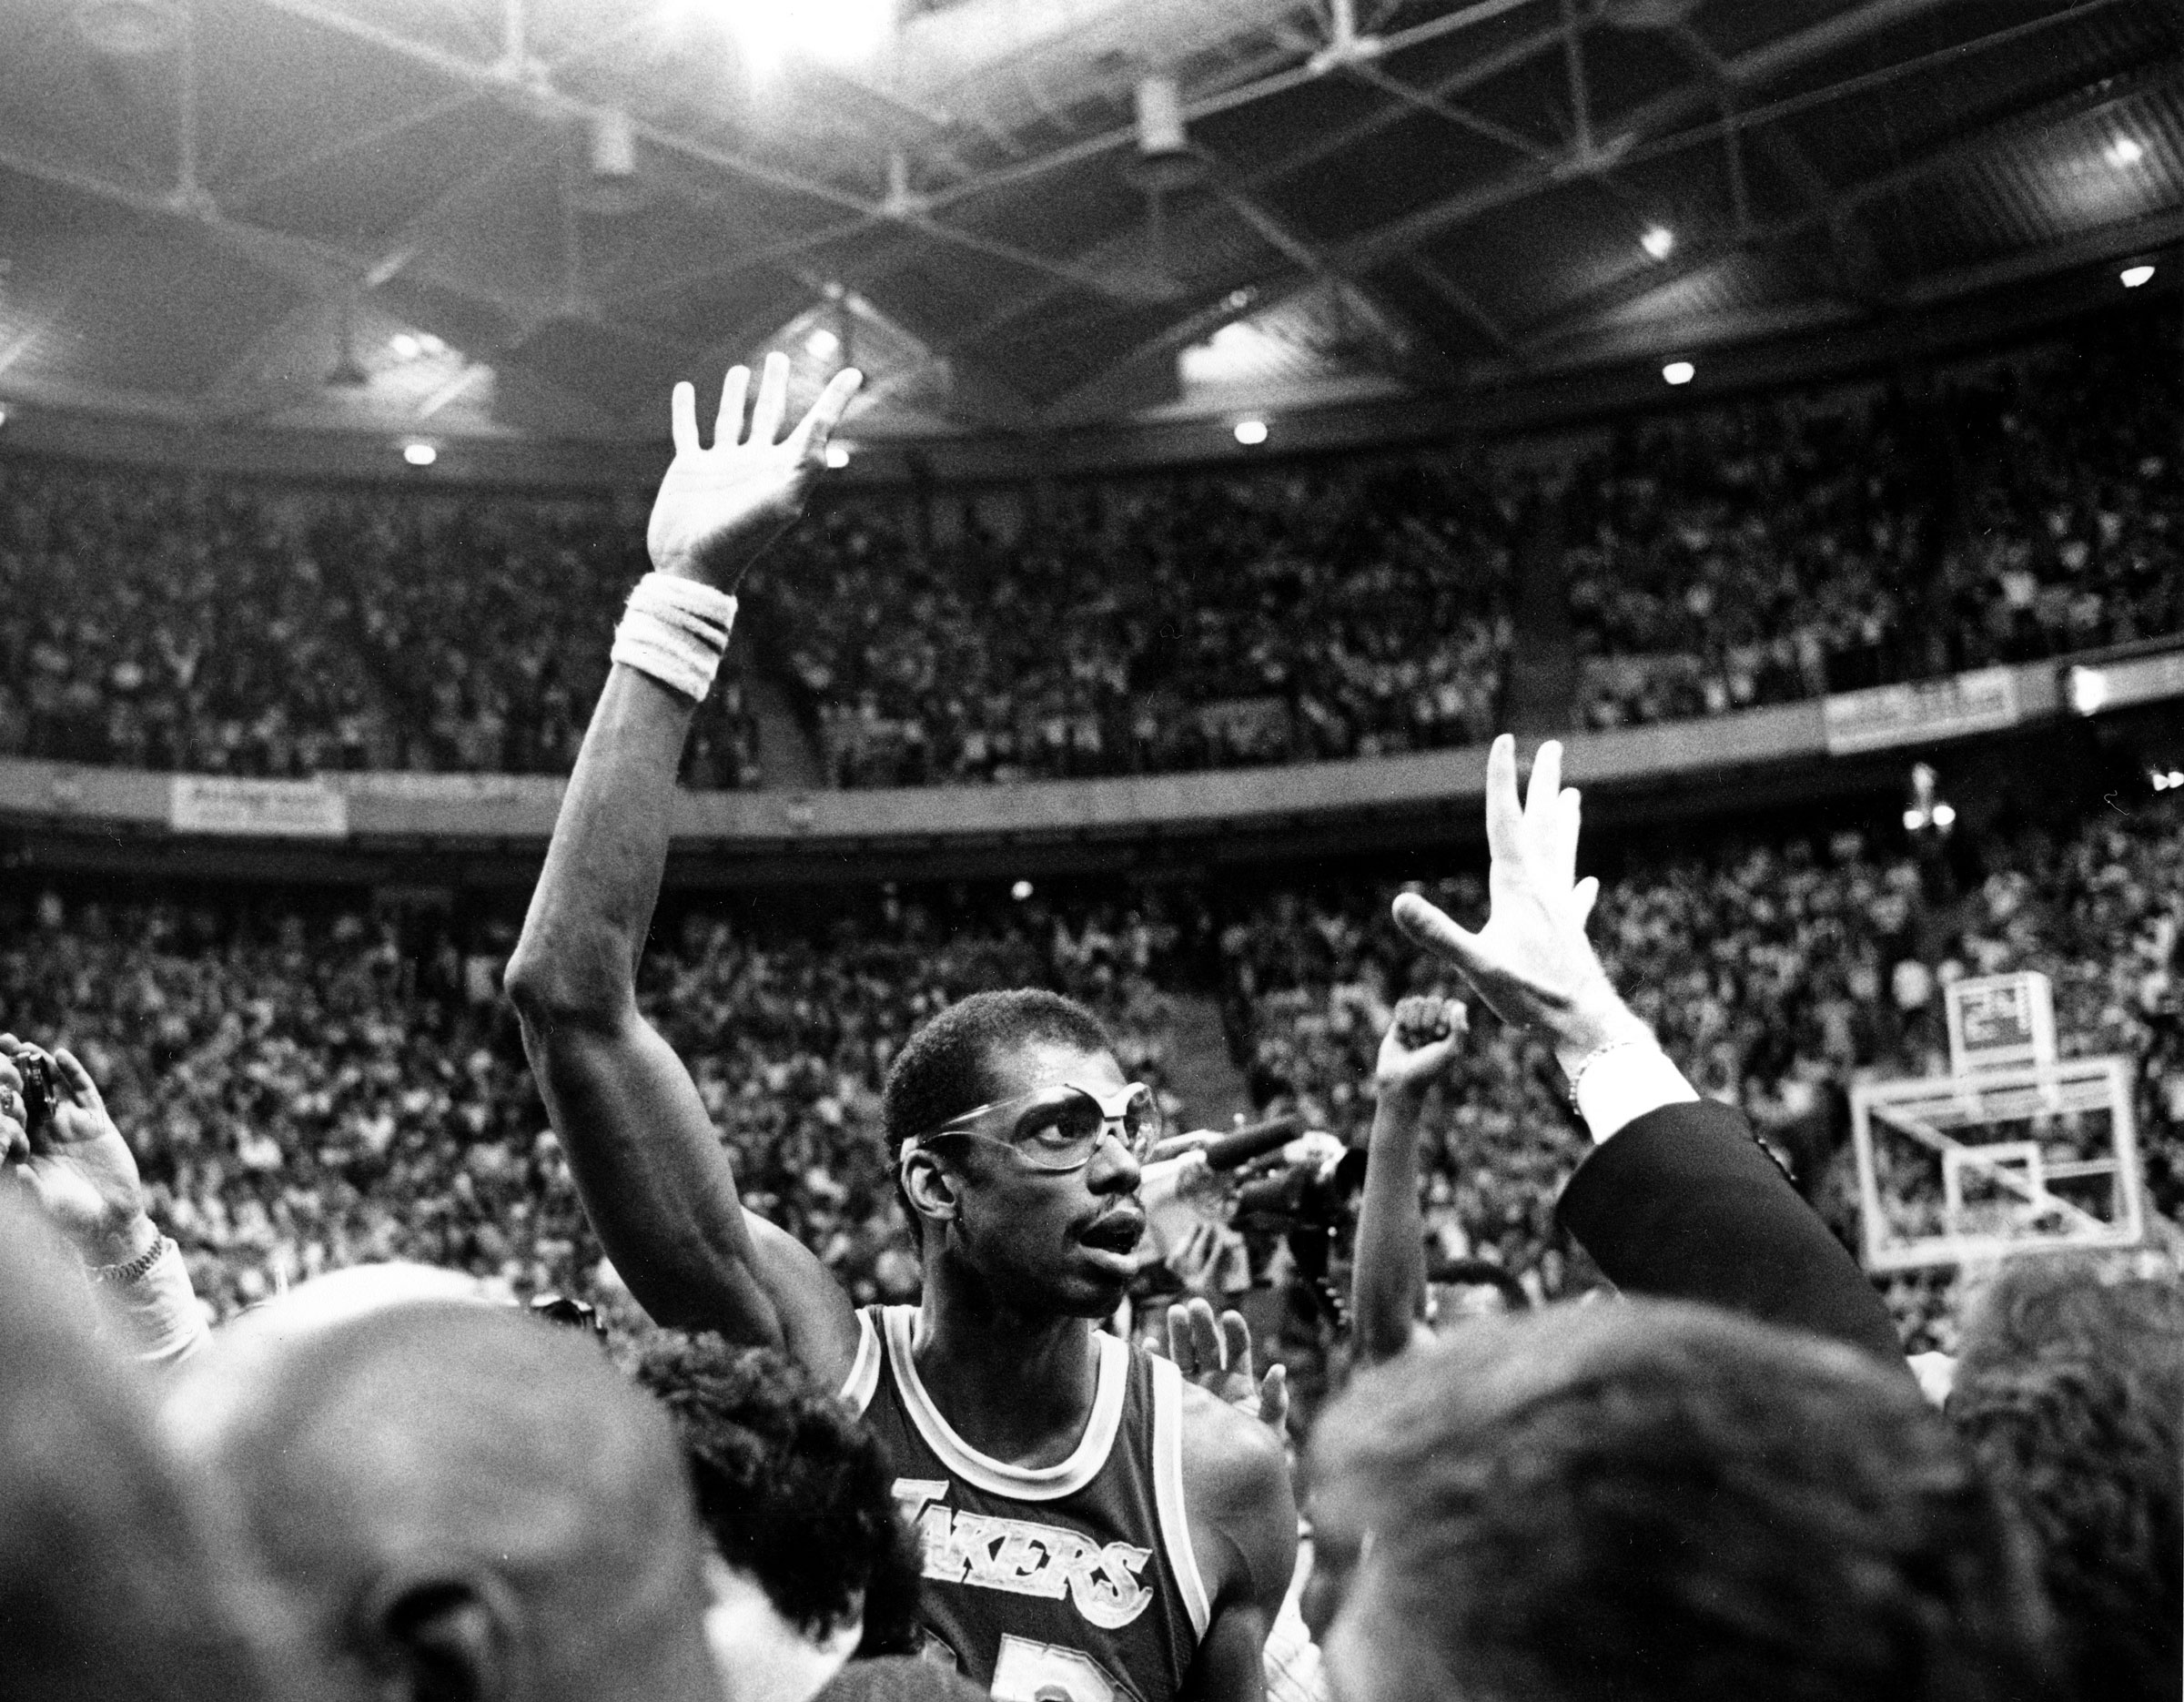 Los Angeles Lakers Kareem Abdul-Jabbar acknowledges the cheering fans after setting a new NBA regular season scoring record of 31,421 points during the game with the Utah Jazz in Las Vegas, Nev., on April 5, 1984. (Lennox McLendon—AP)